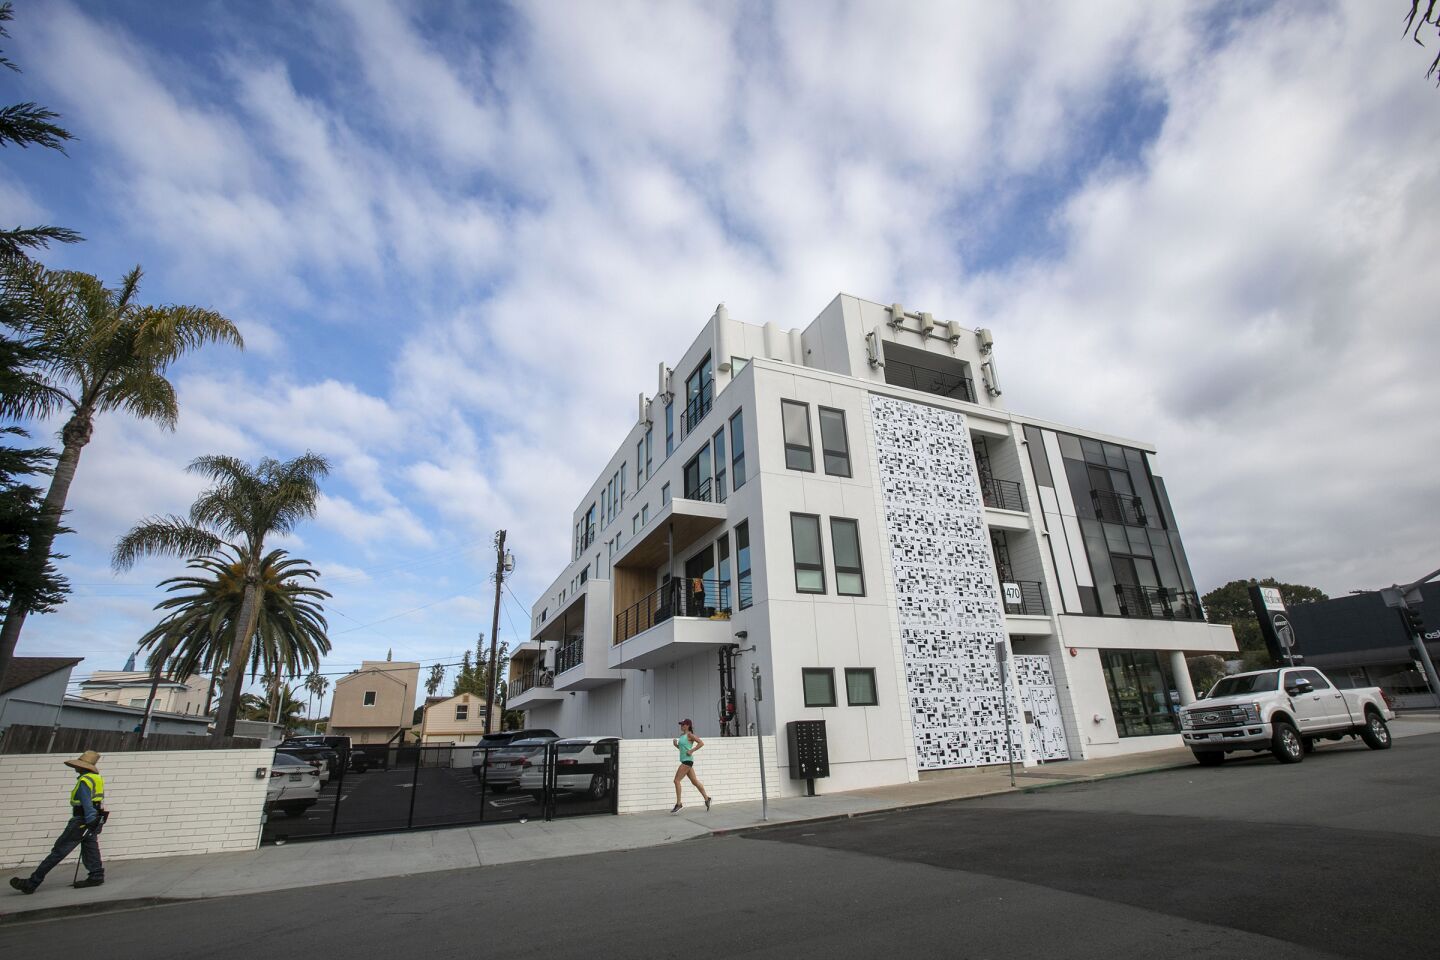 Souther side of the Collins luxury apartment complex on La Jolla Blvd. on Tuesday, January 14, 2020.